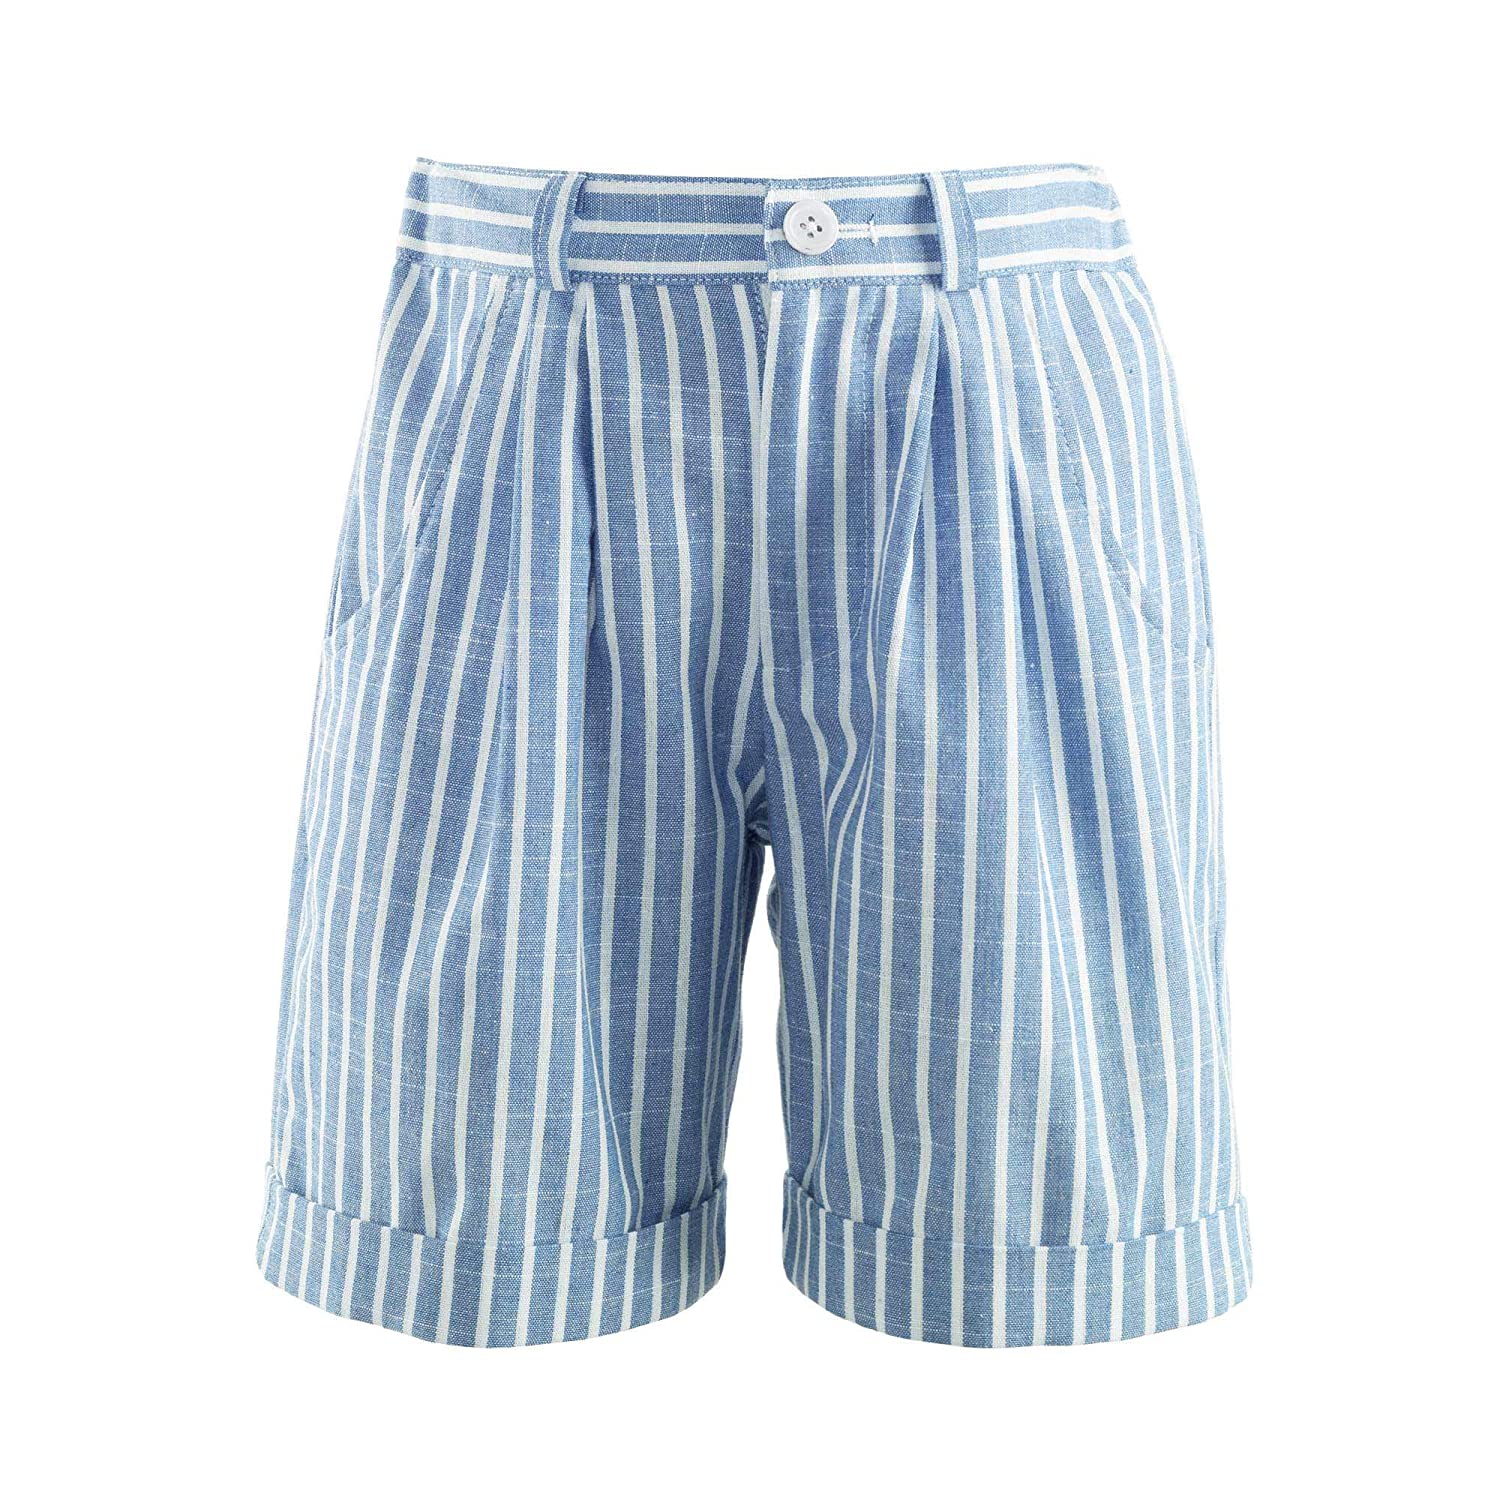 Stripped Taylored Shorts